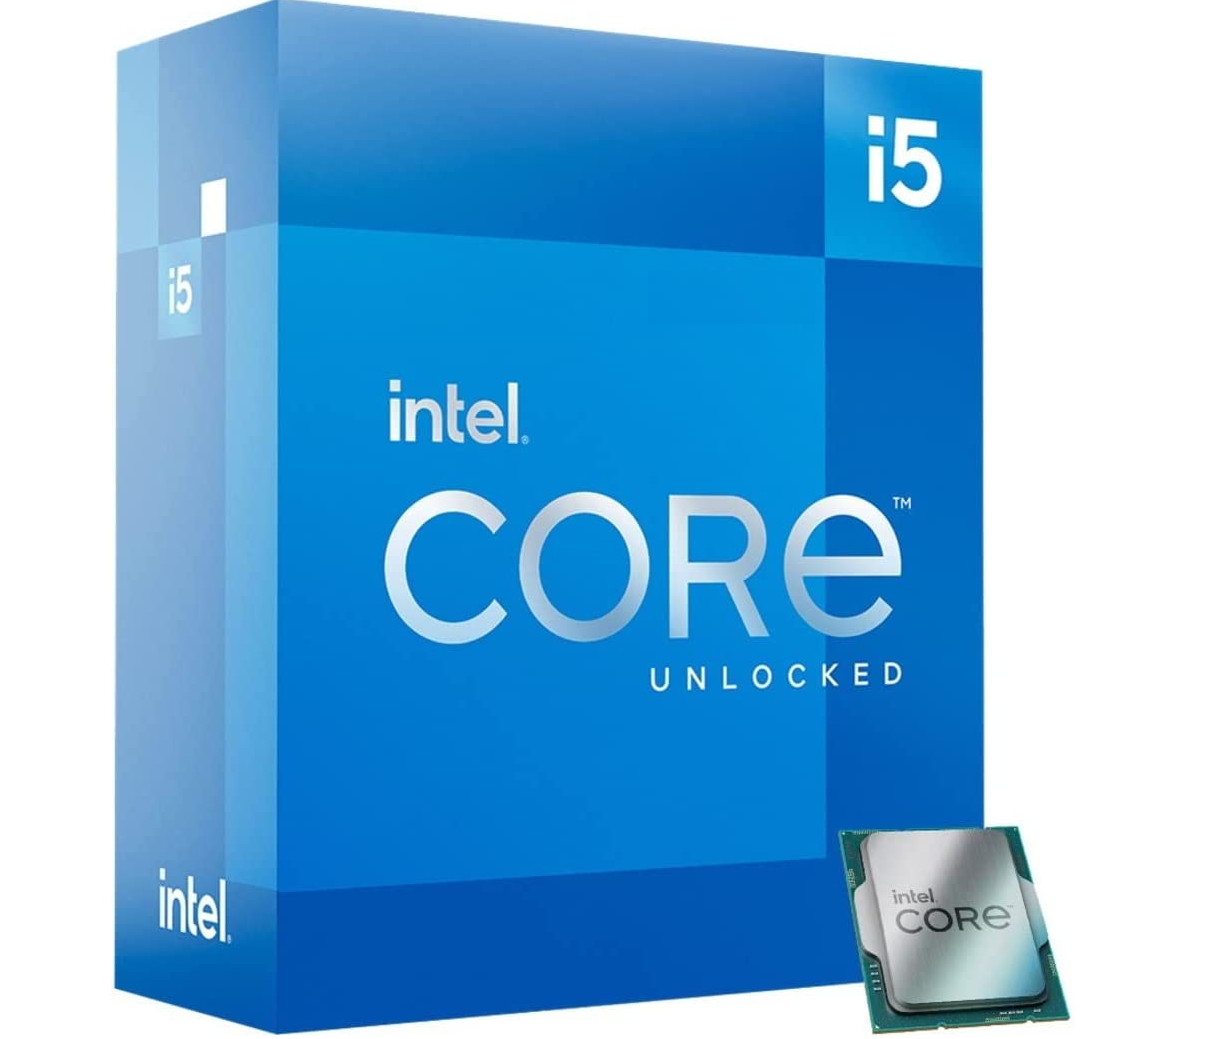 Intel Core i5-13400 is up to 29% faster than i5-12400 in first